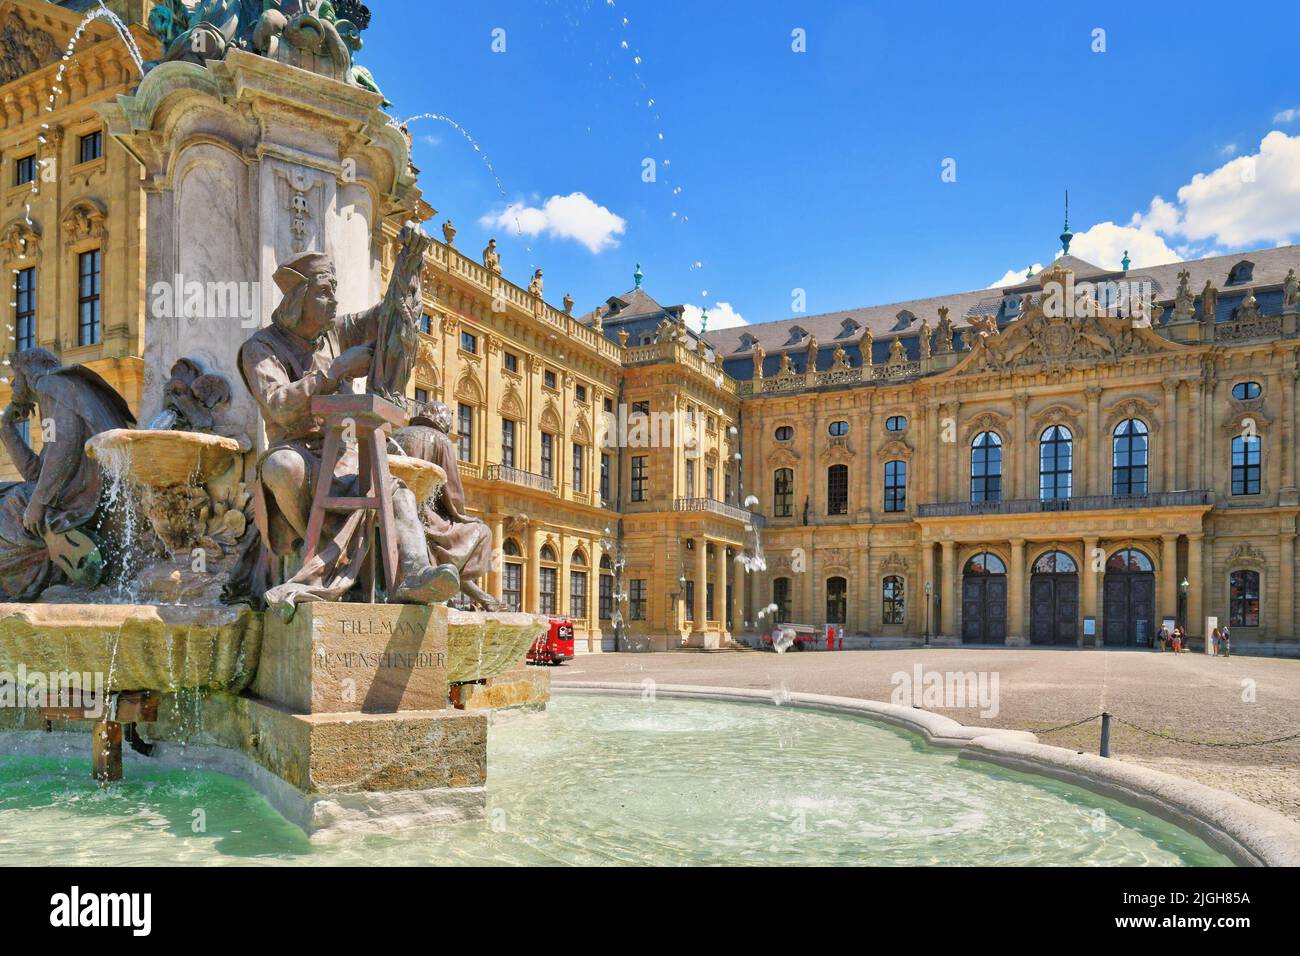 Würzburg, Germany - July 2022: Statue of fountain called 'Frankoniabrunnen' in front of castle 'Würzburg Residence' Stock Photo